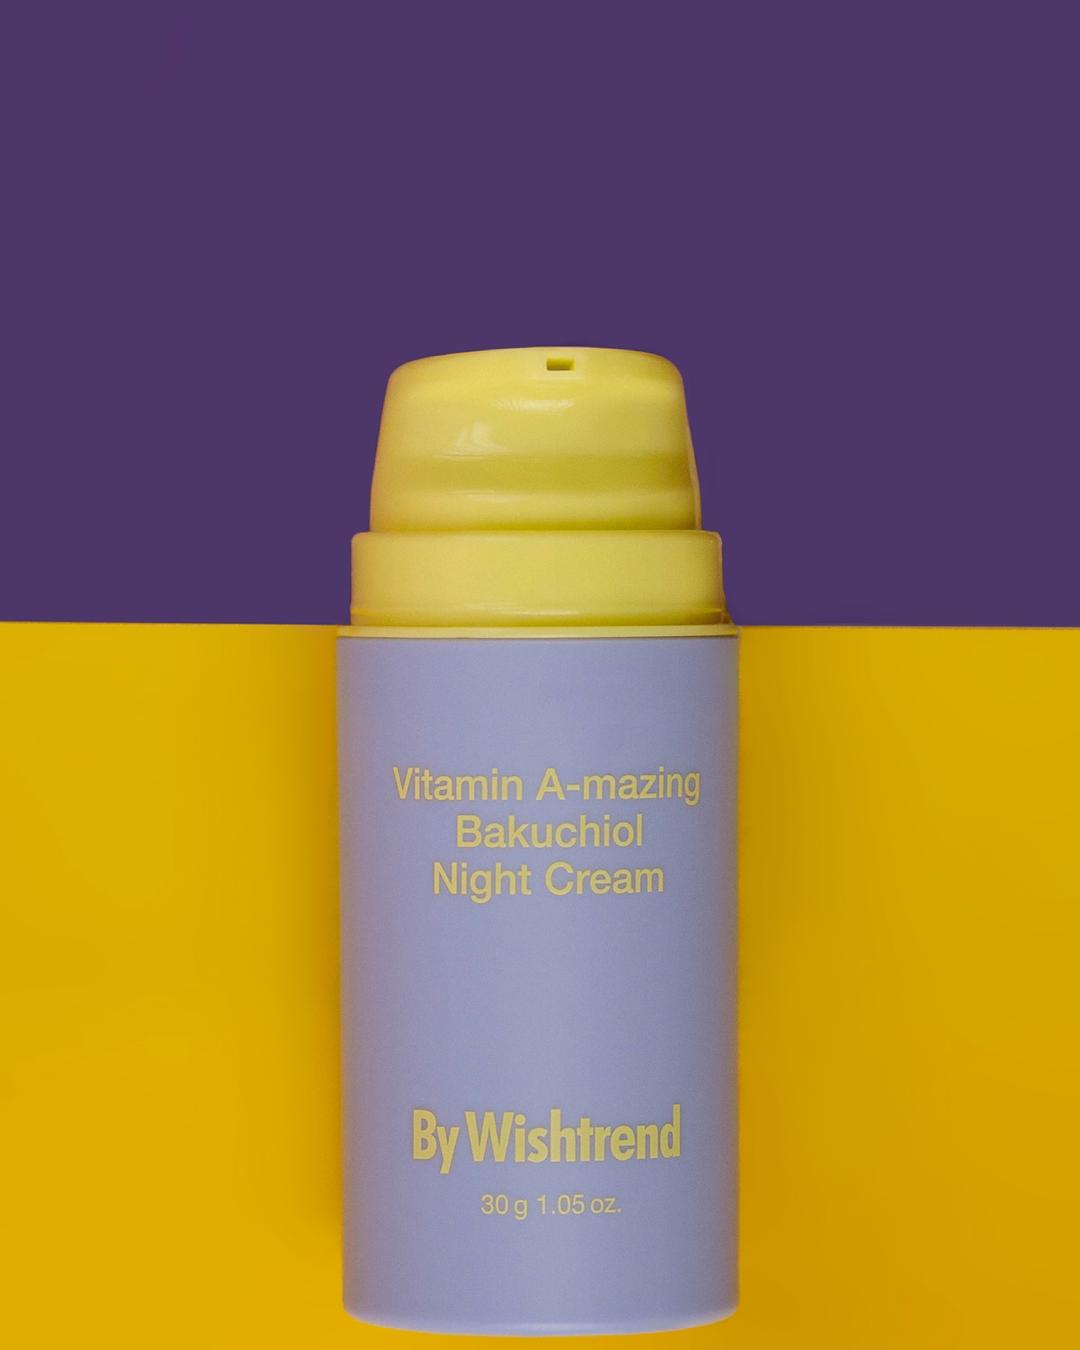 Крем by wishtrend vitamin a mazing bakuchiol. By Wishtrend Бакучиол. By Wishtrend Vitamin a-mazing Bakuchiol Night Cream.